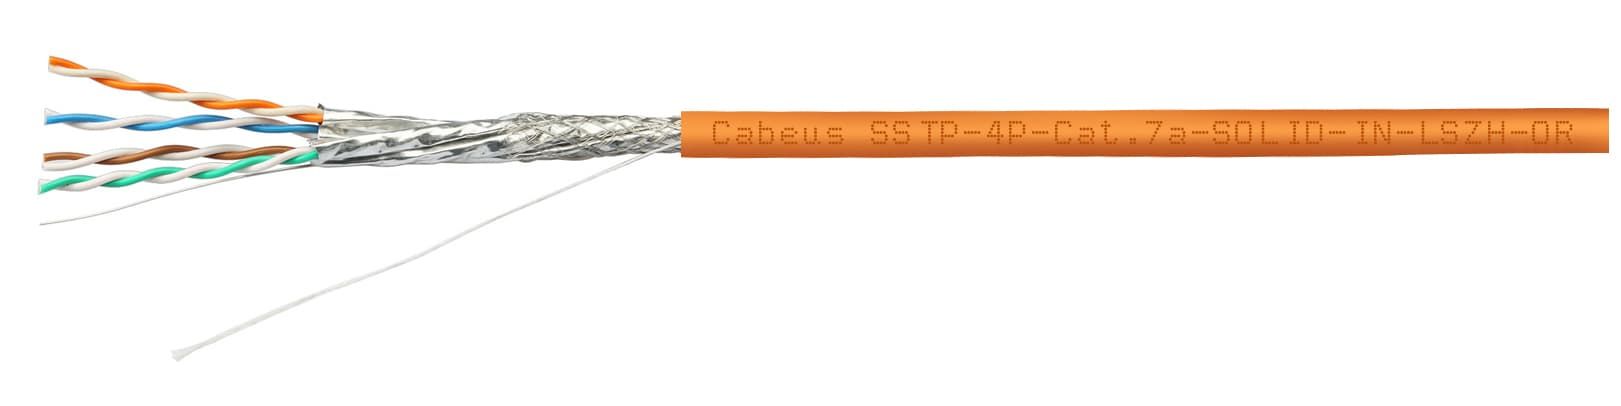 Cabeus SFTP-4P-Cat.6a-SOLID-IN-LSZH